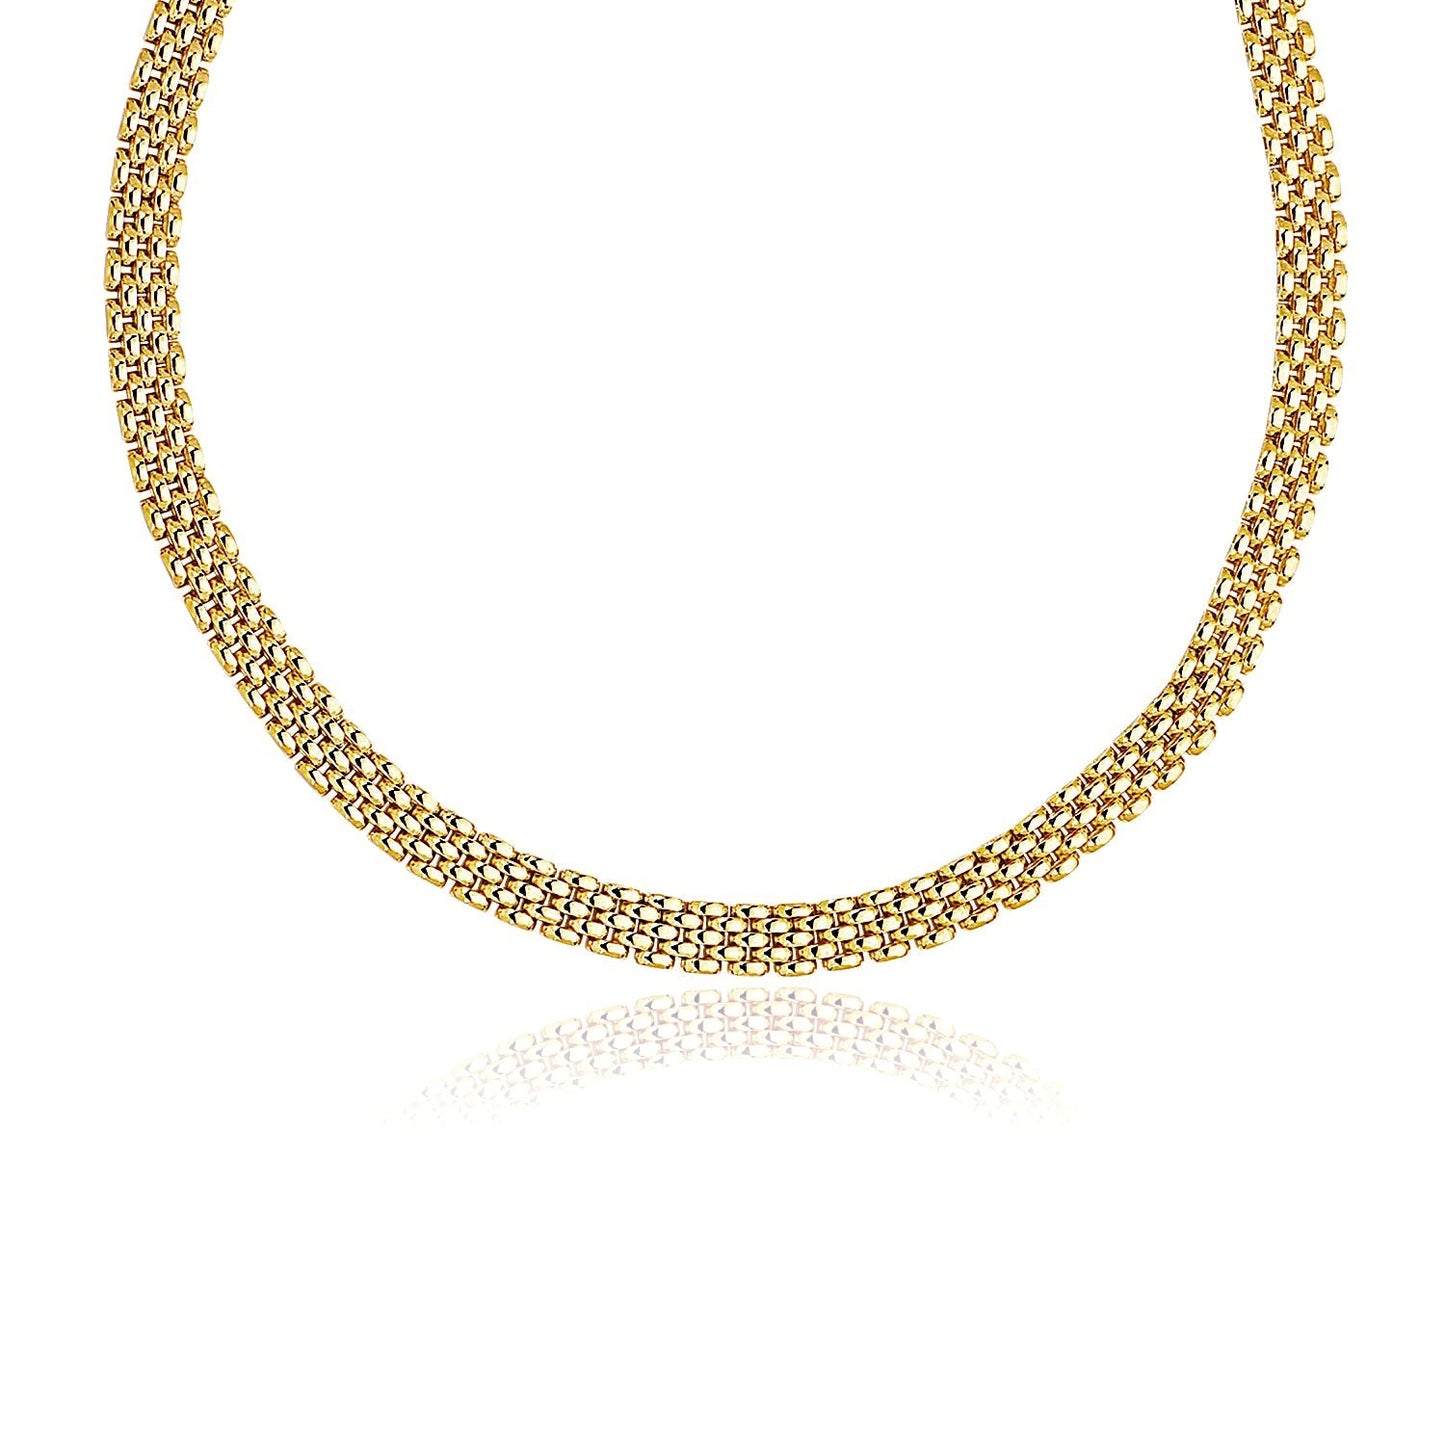 14k Yellow Gold Polished Multi-Row Panther Link Necklace